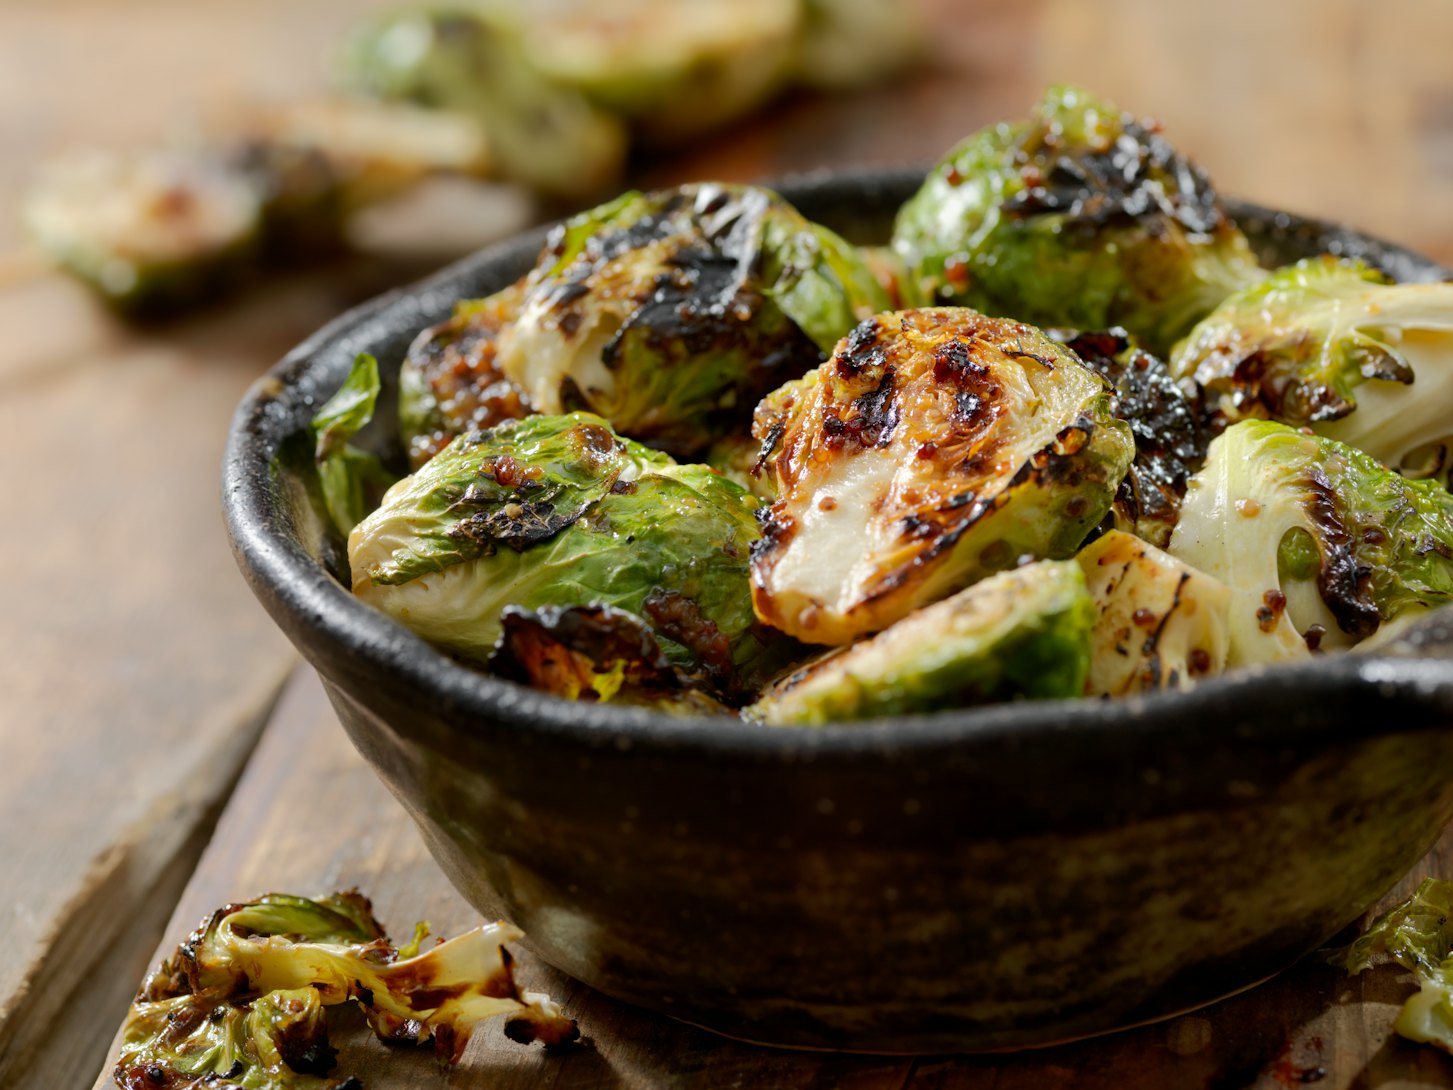 Eating in brussels sprouts in winter is nourishing. 